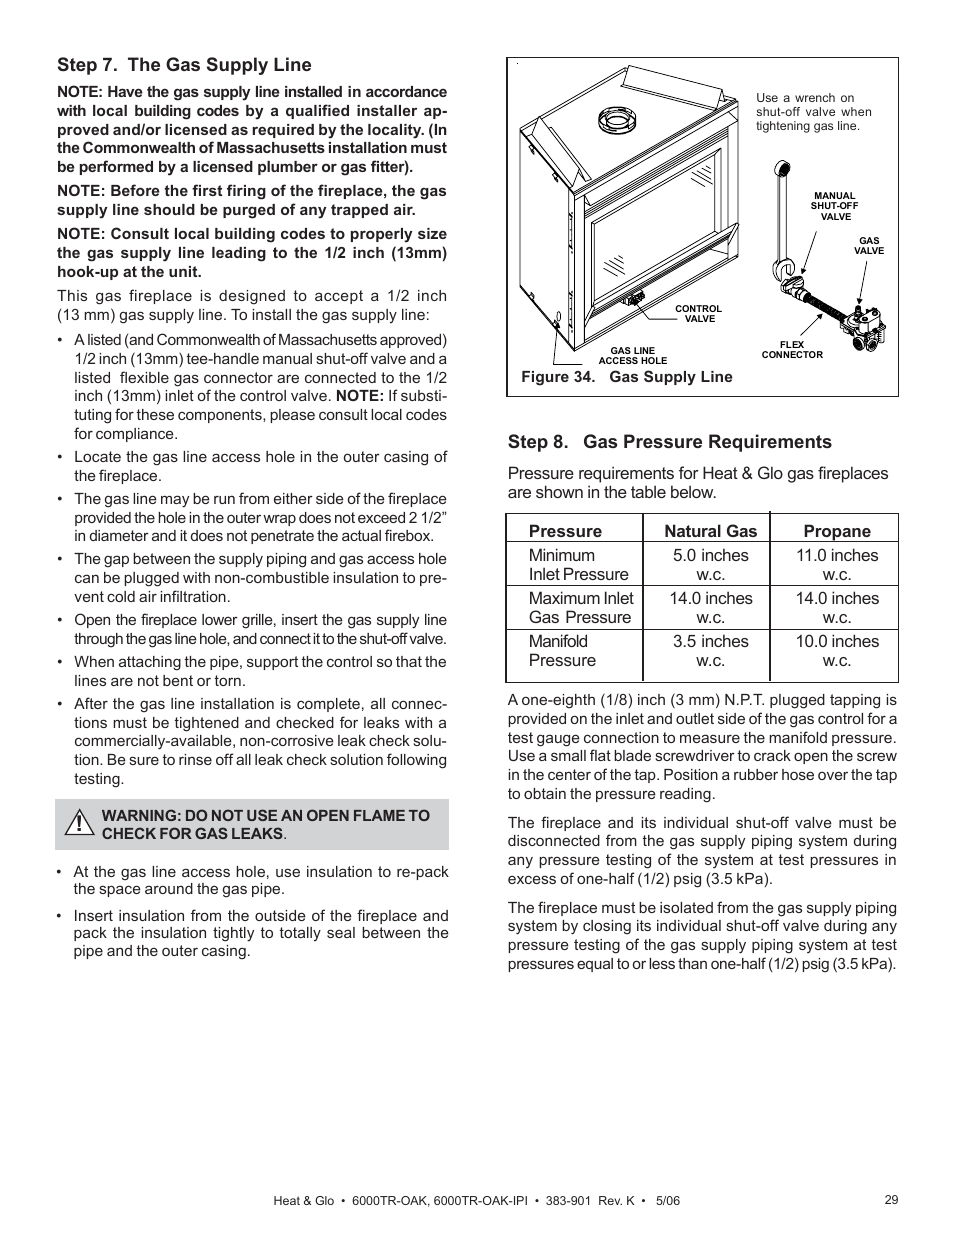 Heat & Glo Fireplace 6000TR-OAK User Manual | Page 25 / 31 | Also for